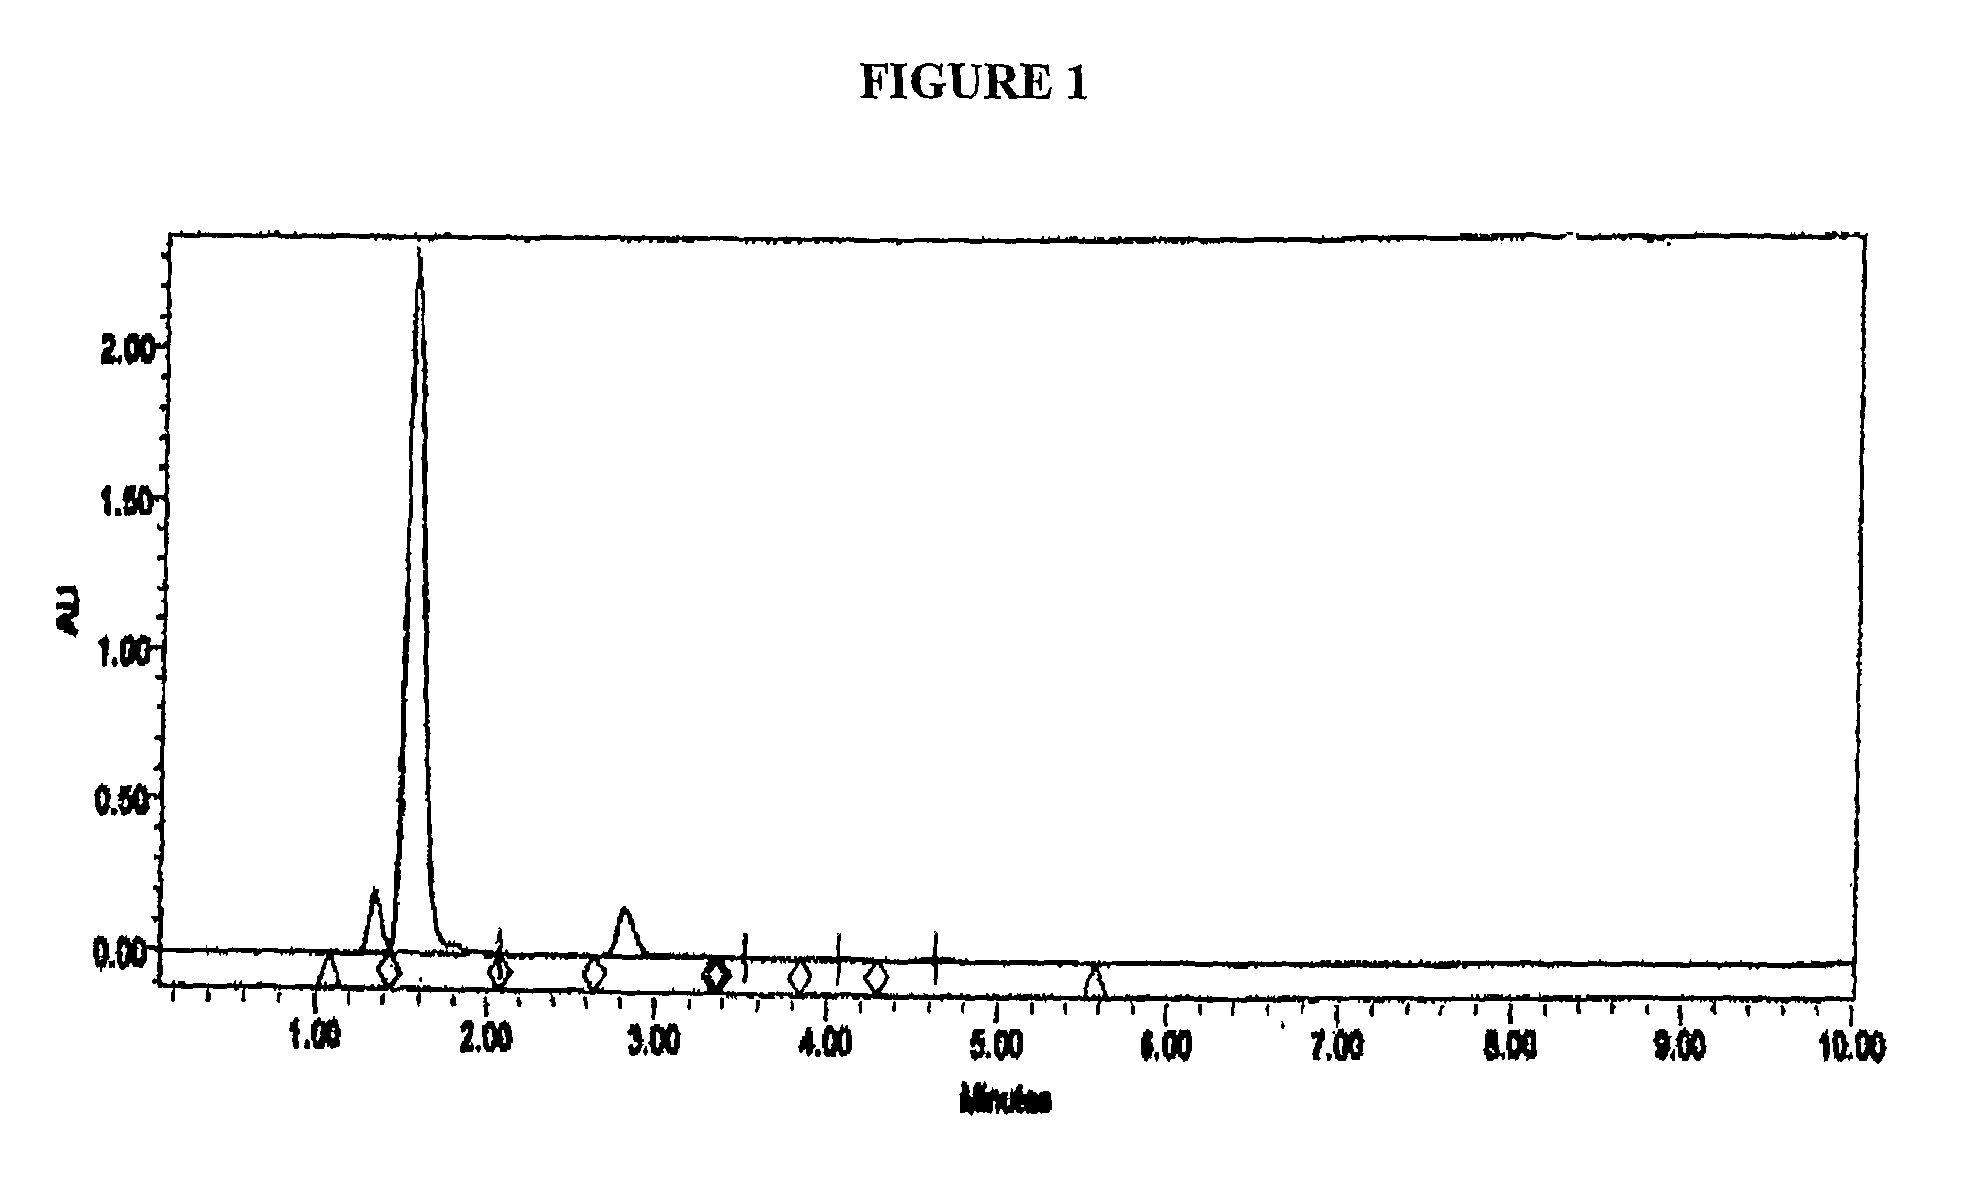 Pharmacologically active compounds containing sulfur